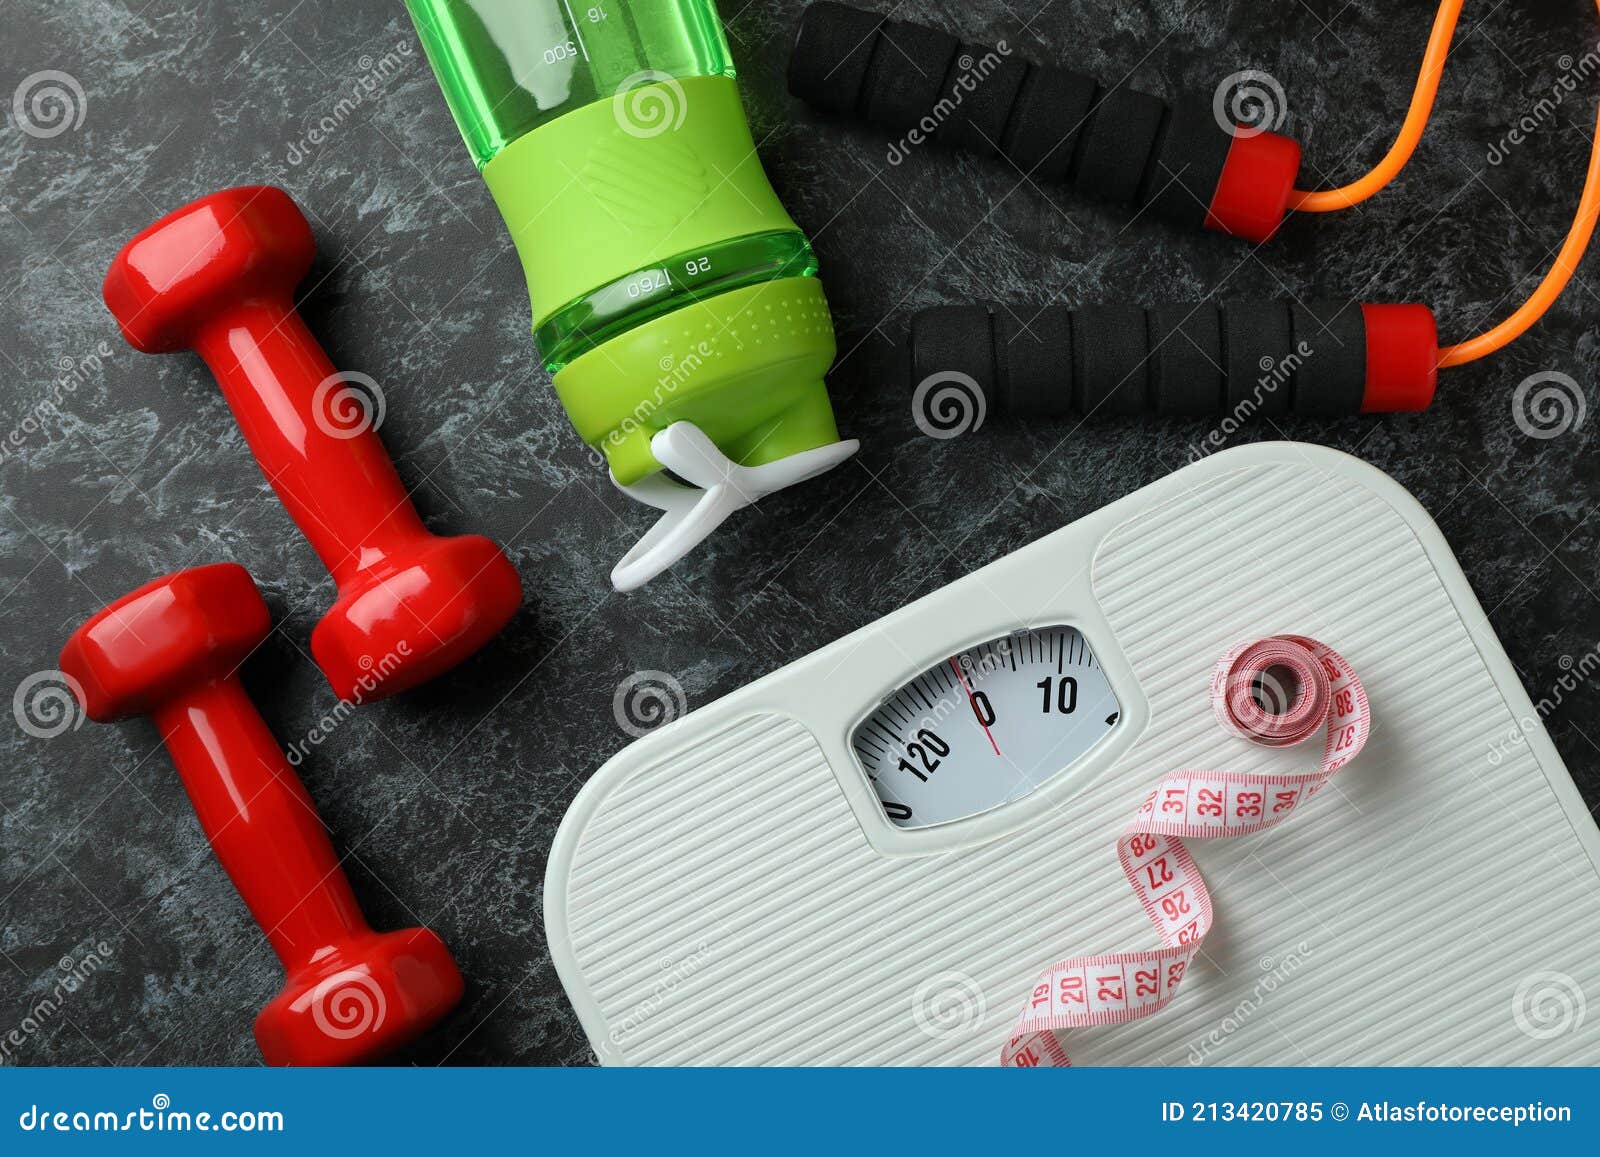 Weight Loss Accessories on Black Smoky Background, Top View Stock